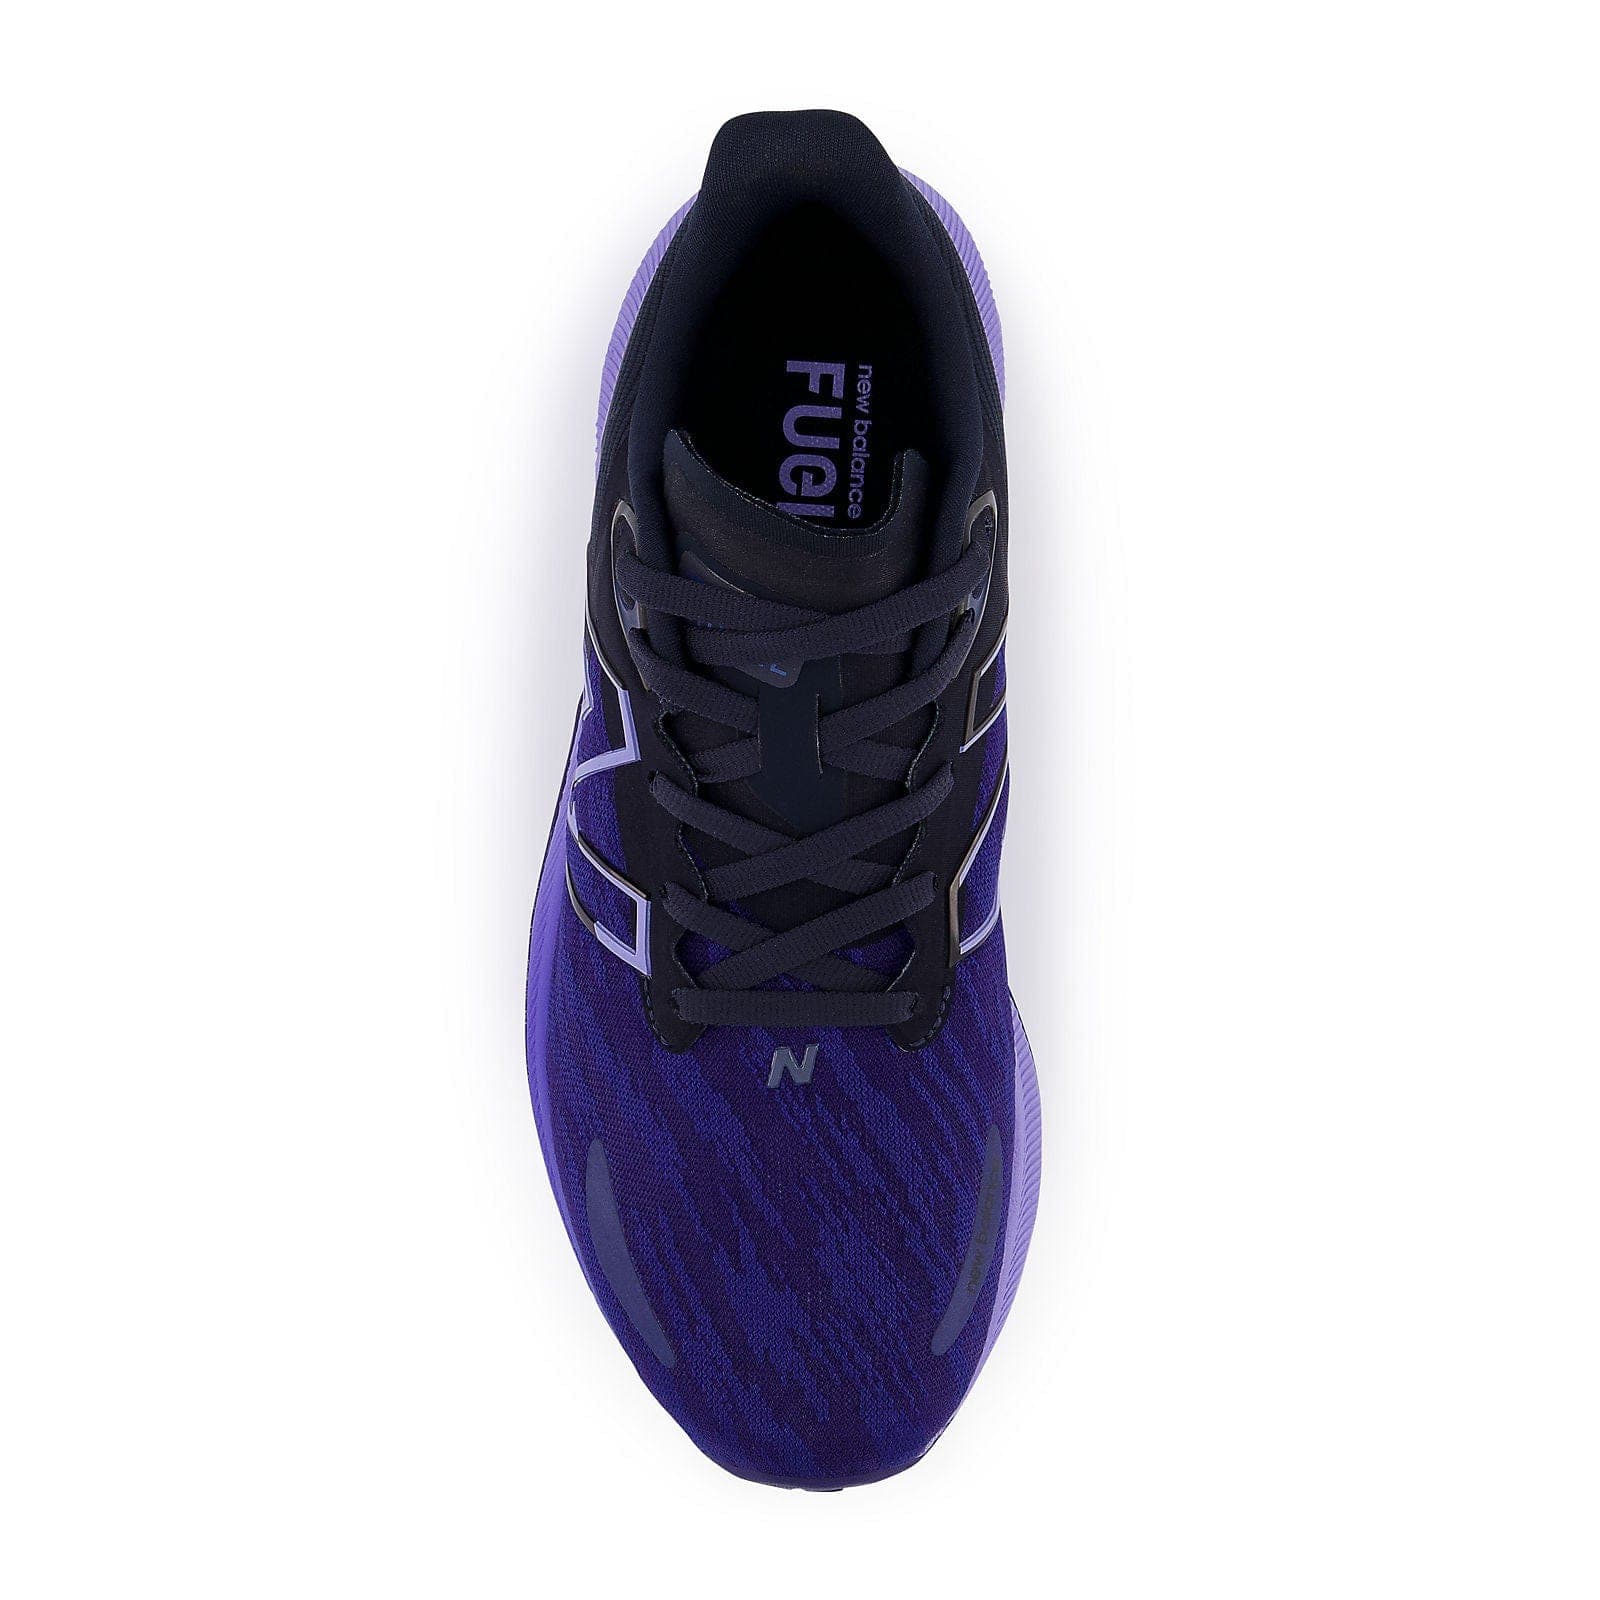 New Balance FuelCell Propel v3 (Women's) - Blue with vibrant violet and eclipse